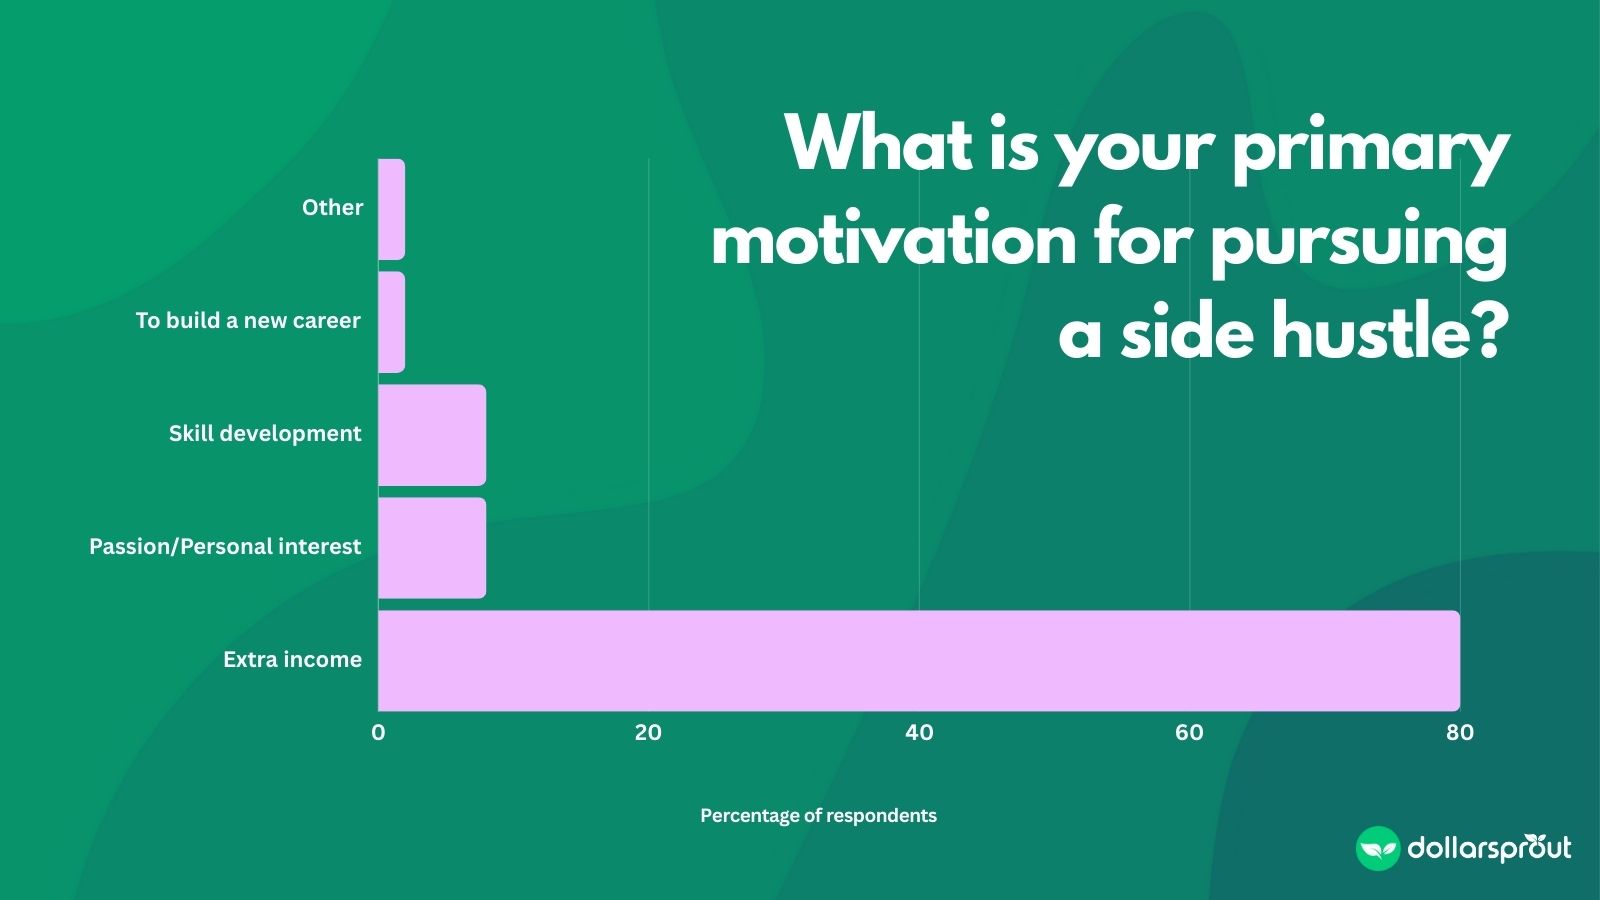 Bar chart showing the most common reasons for starting a side hustle.